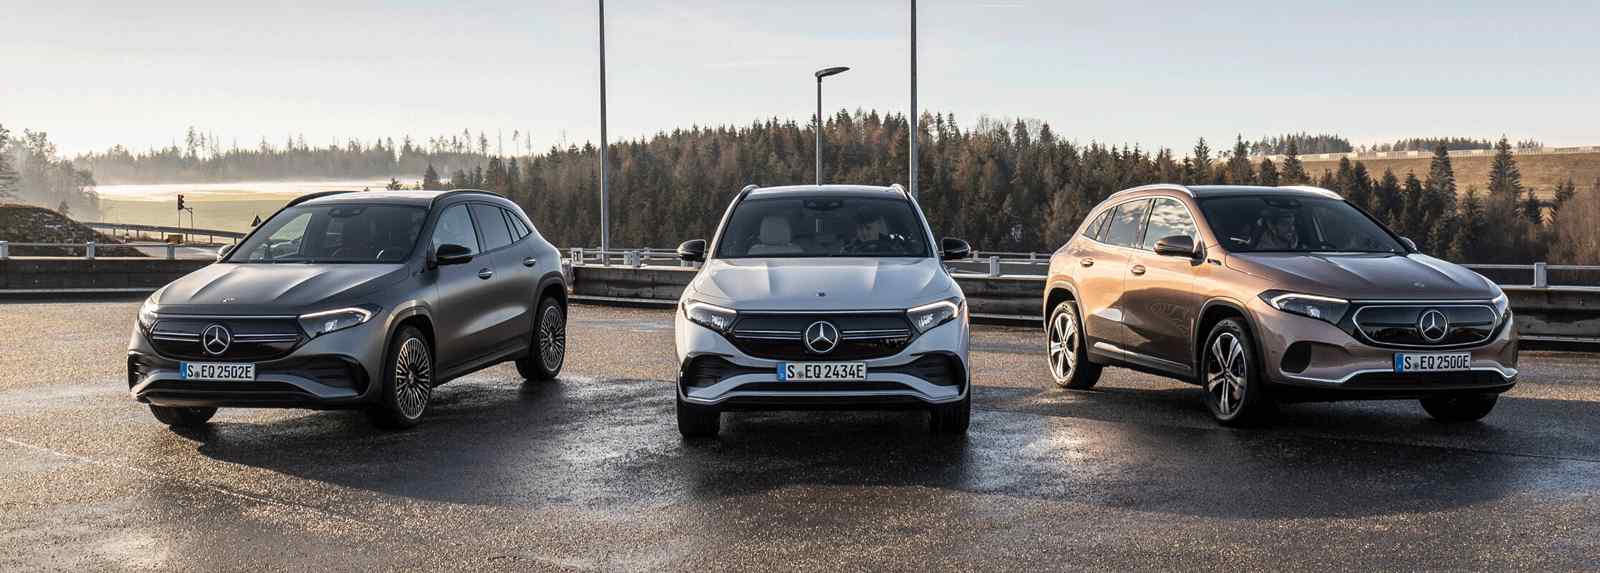 Mercedes-Benz South Africa to launch five all-electric models in 2022